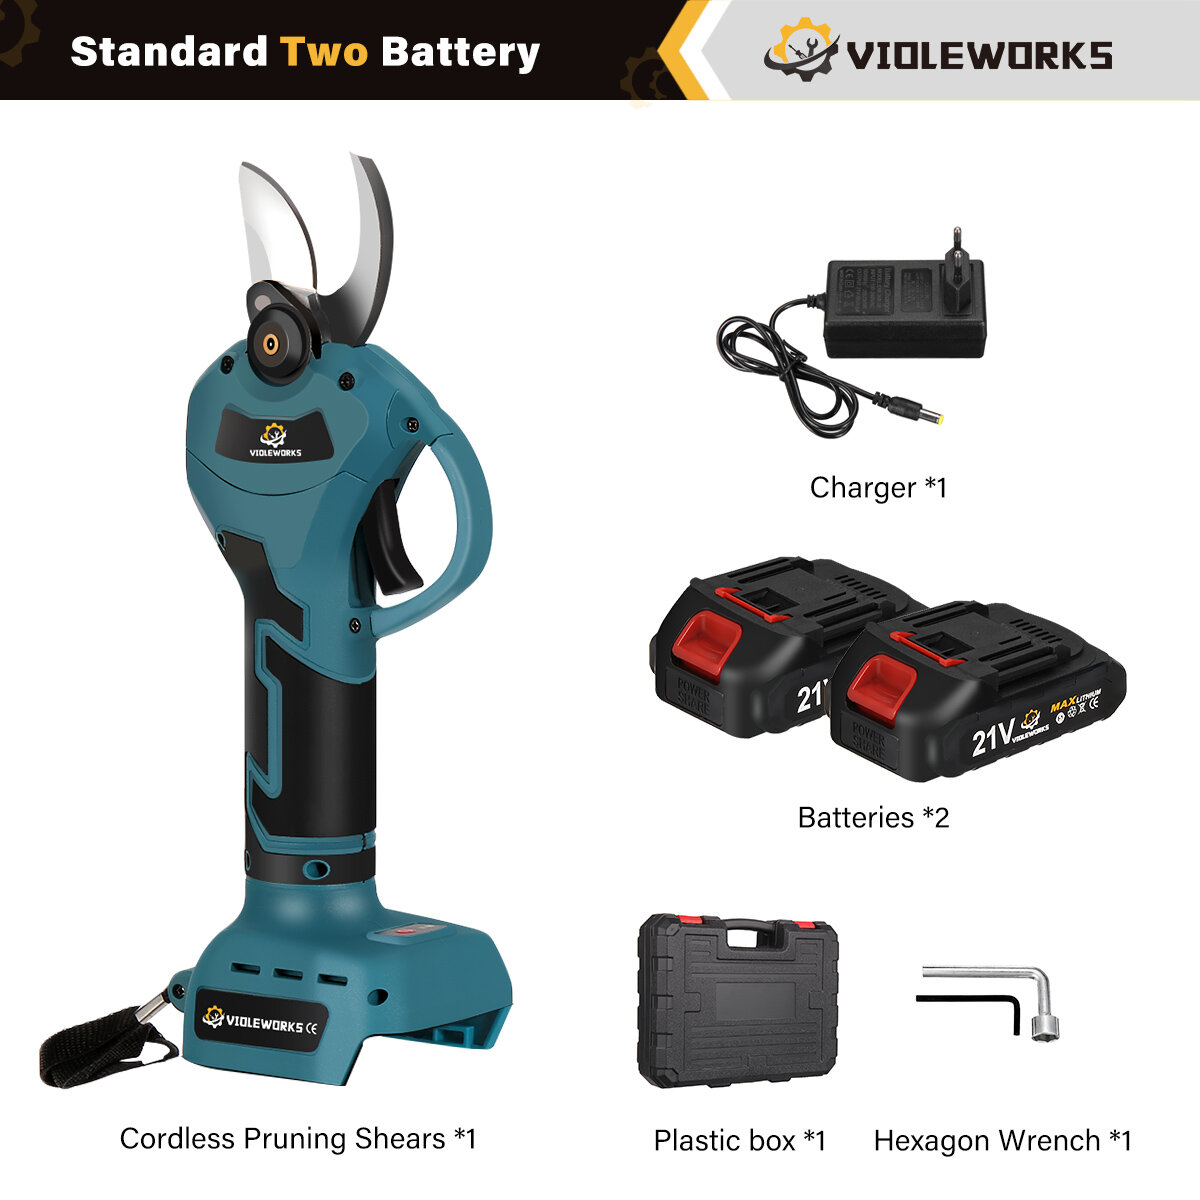 best price,violeworks,21v,brushless,pruning,shears,with,1500mah,batteries,eu,discount